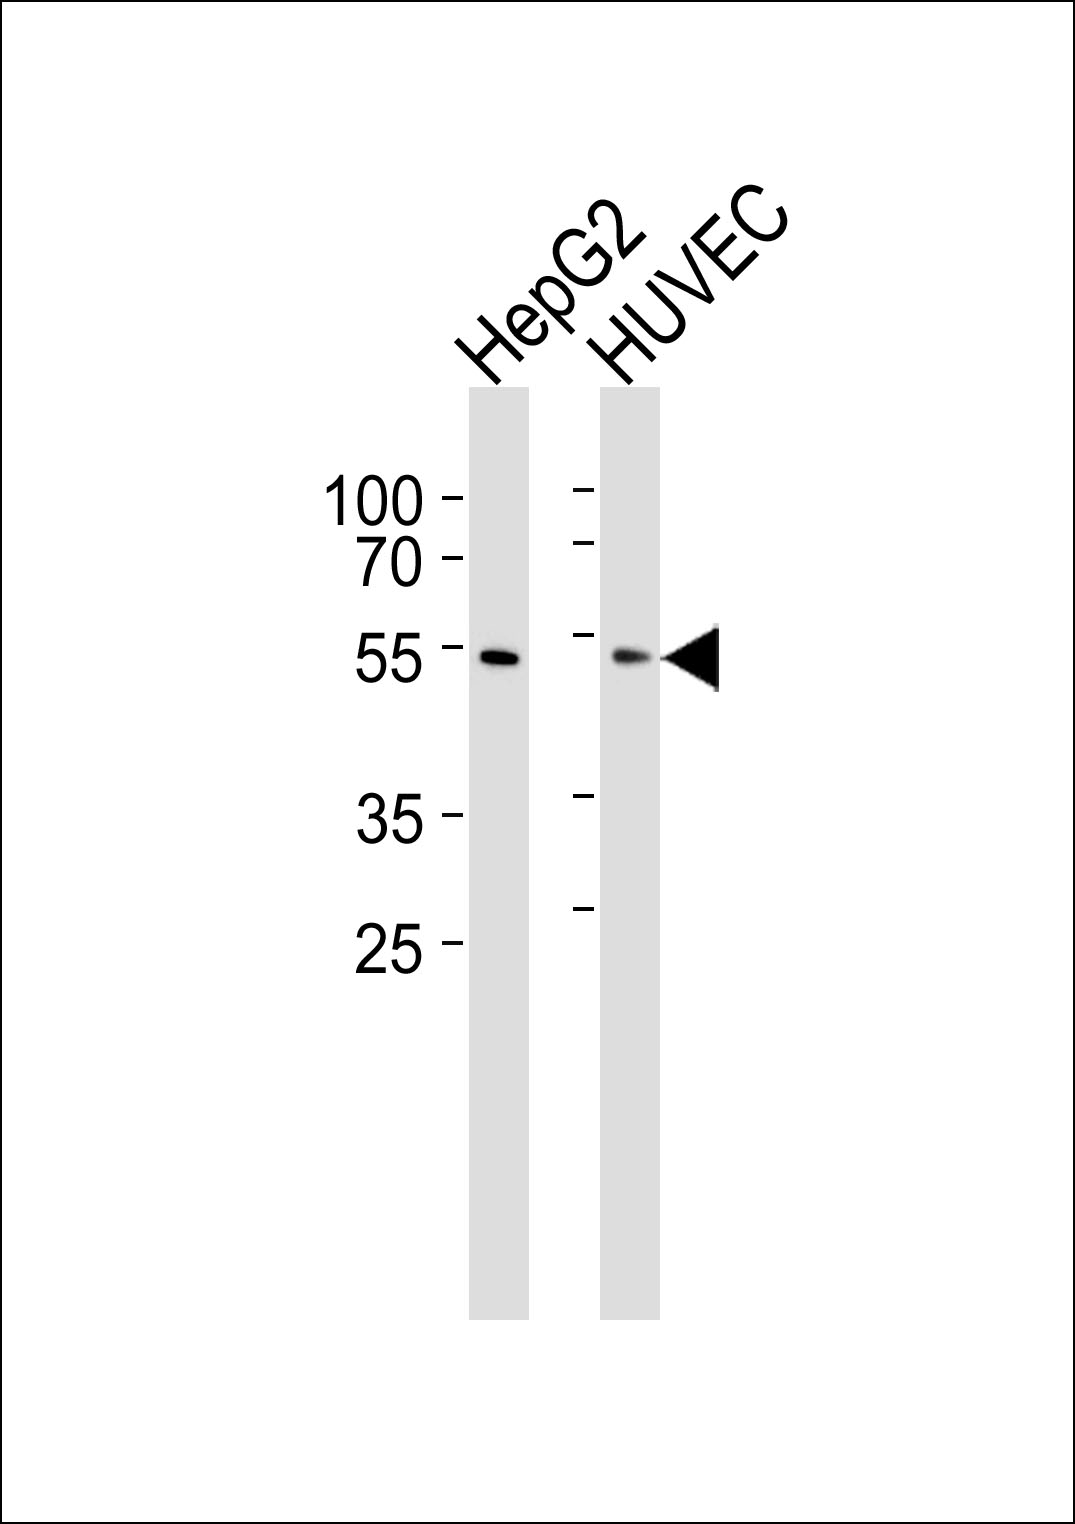 Western blot analysis of lysates from HepG2, HUVEC cell line (from left to right), using SUV39H2 Antibody (K48)(Cat.  #AP1281A).  AP1281A was diluted at 1:1000 at each lane.  A goat anti-rabbit IgG H&L(HRP) at 1:5000 dilution was used as the secondary antibody. Lysates at 35ug per lane.